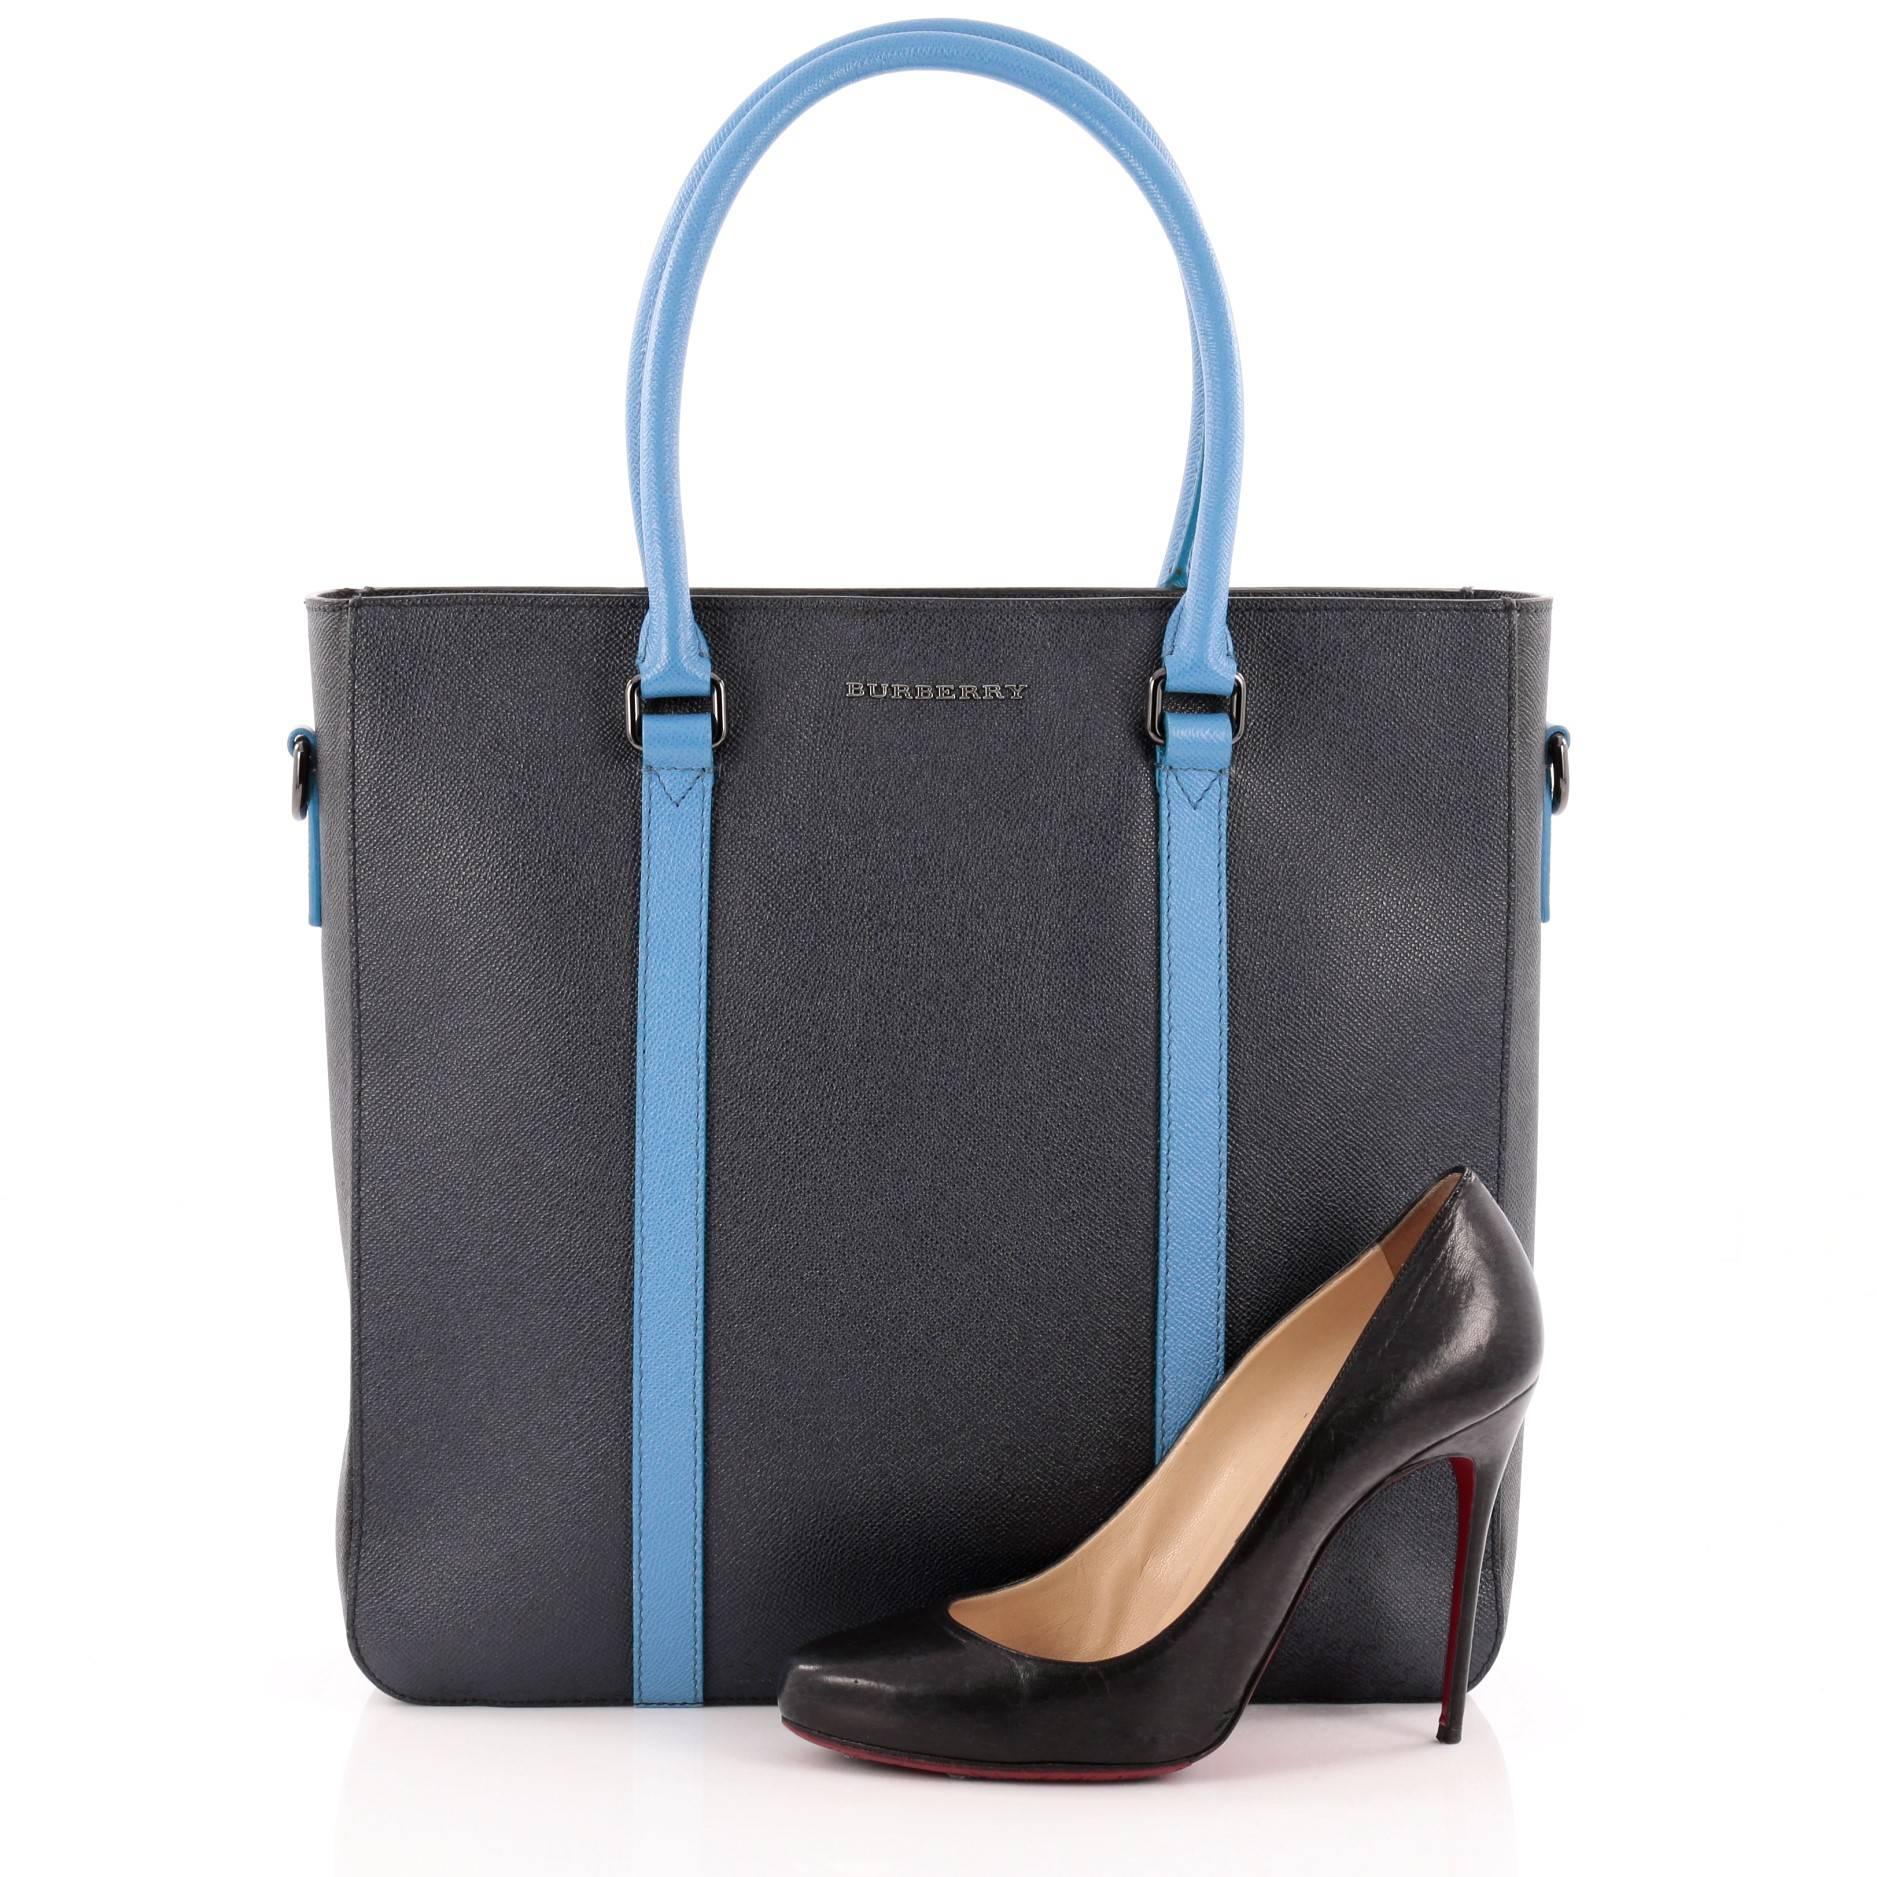 This authentic Burberry Kenneth Tote Saffiano Leather Medium displays a structured and clean urban style. Crafted from navy blue textured leather with sky blue leather trims, this chic tote features dual-rolled top handles, logo lettering at front